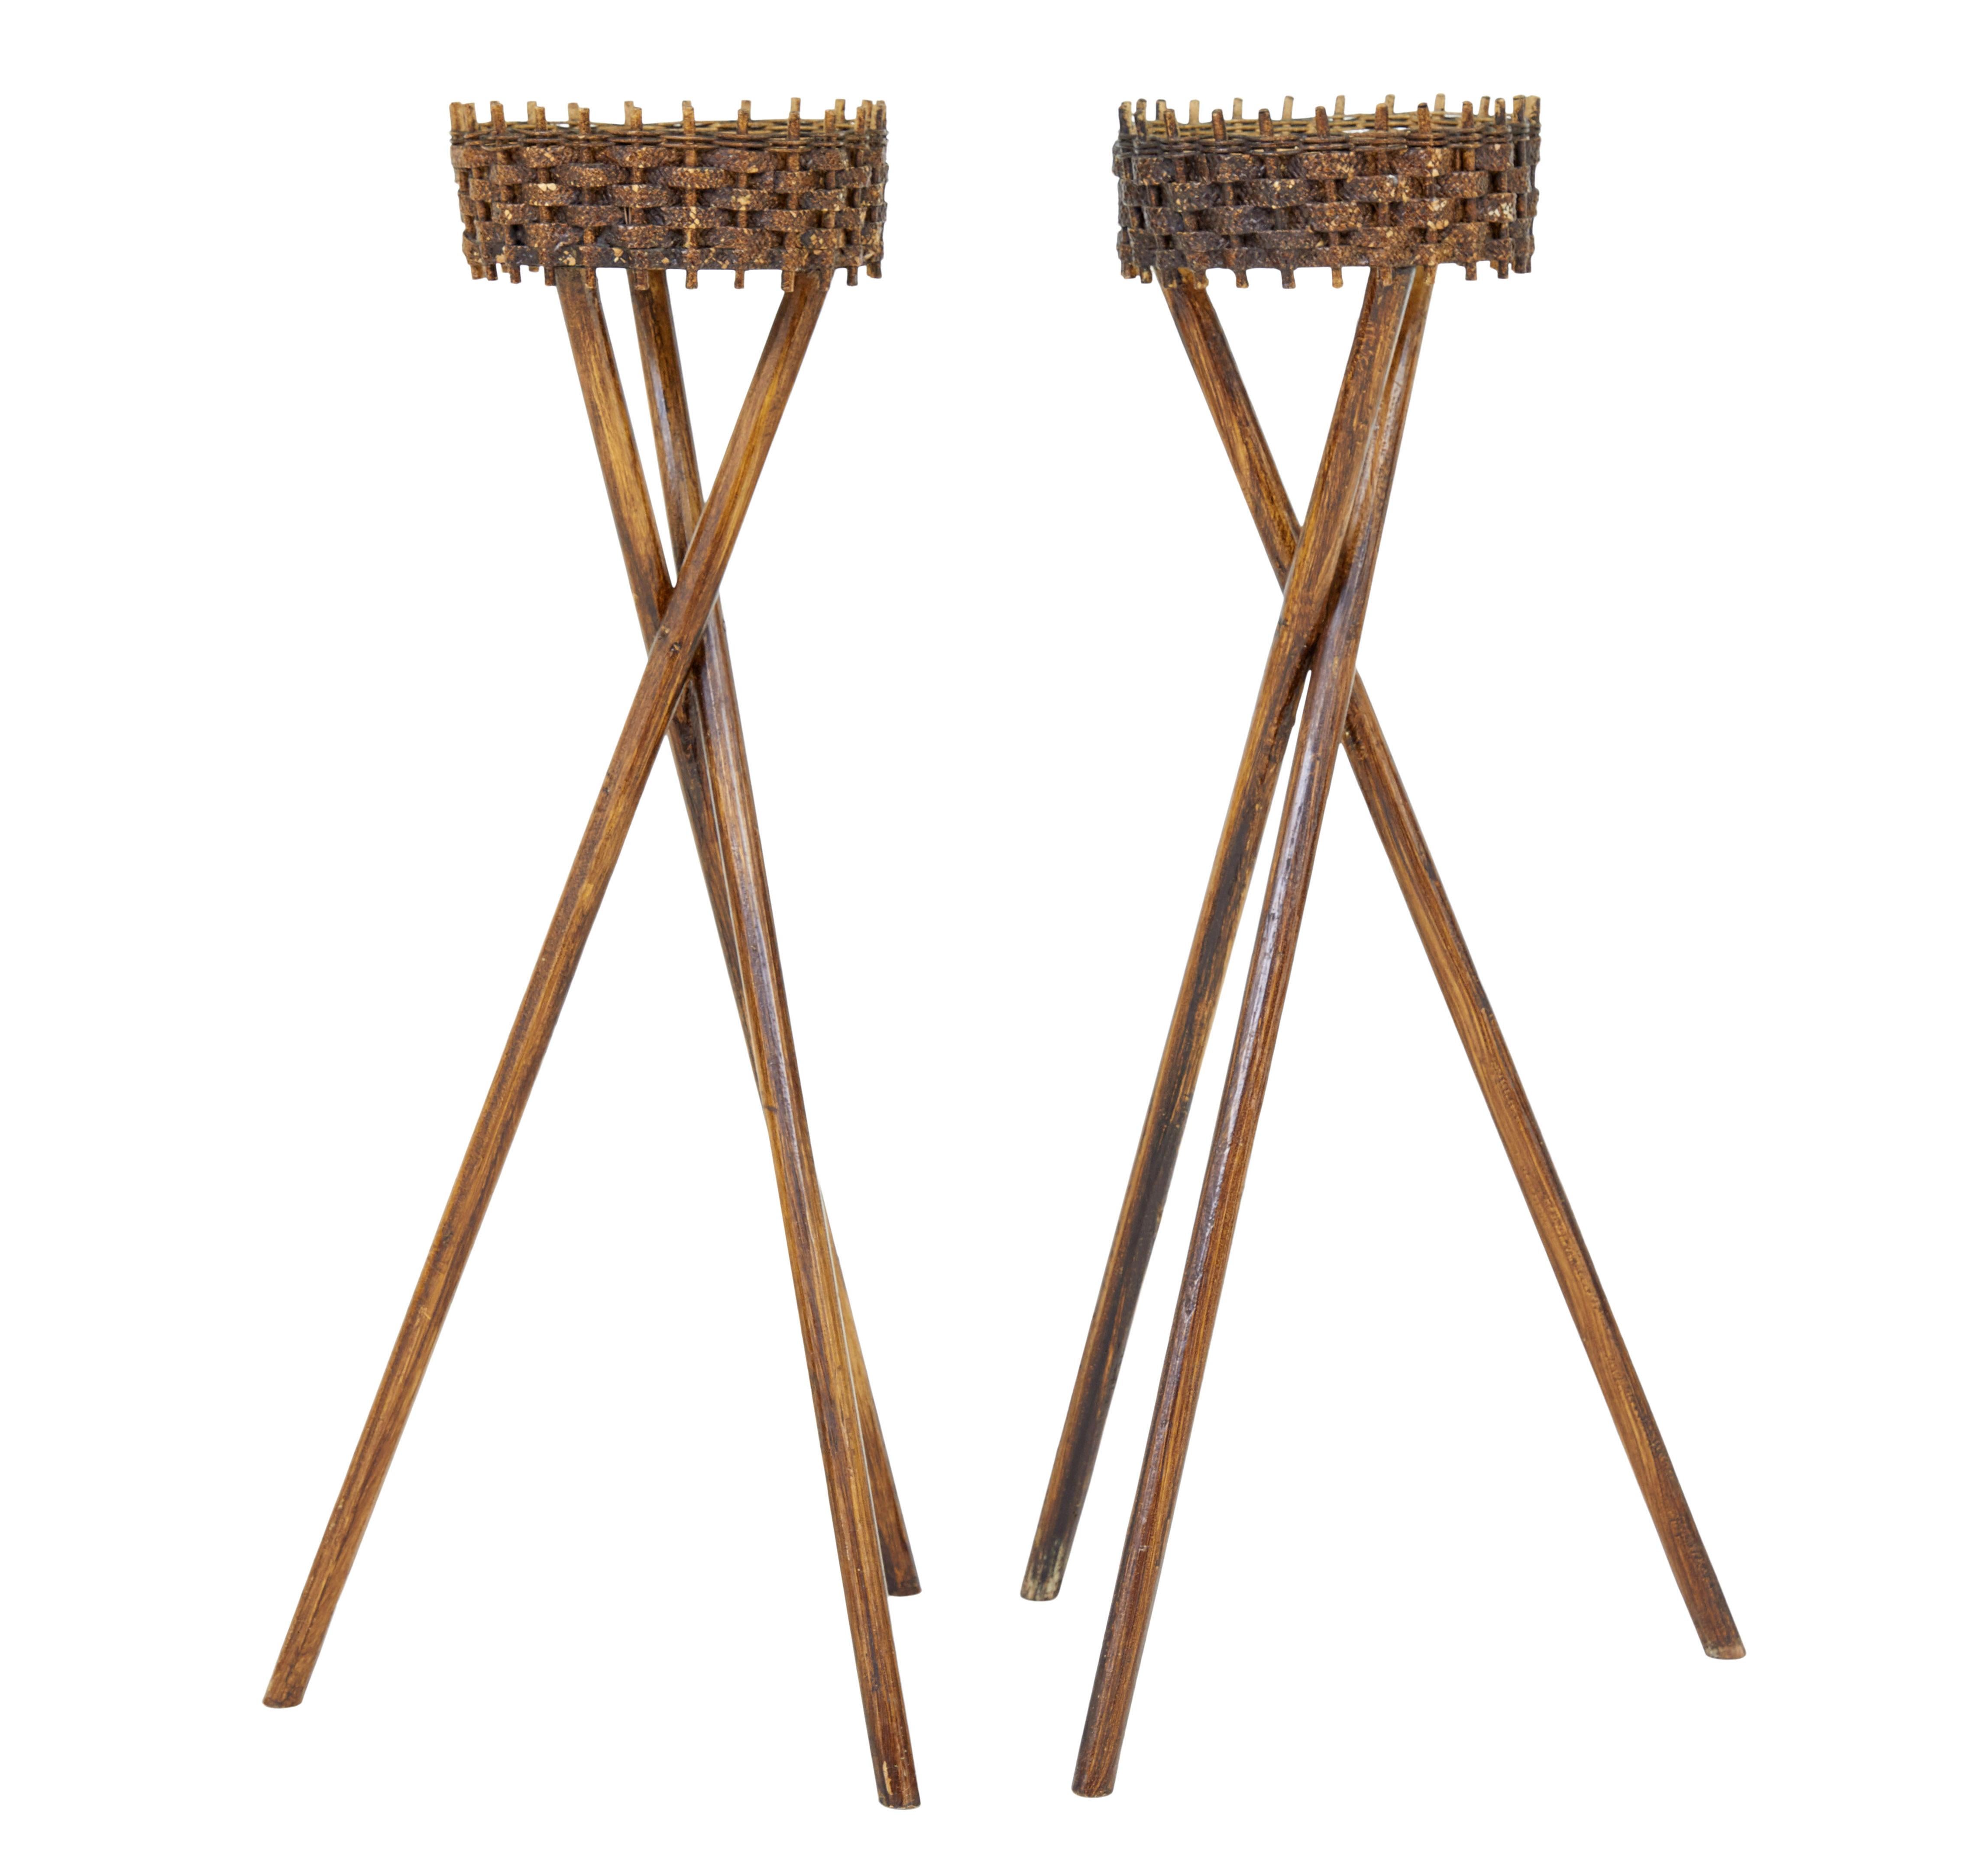 Pair of mid 20th century woven plant stands circa 1950.

Good quality pair of Swedish made woven cane plant stands.

Made using traditional techniques of weaving between wooden pegs to form a circular container for plant pots.  Supported by a tripod